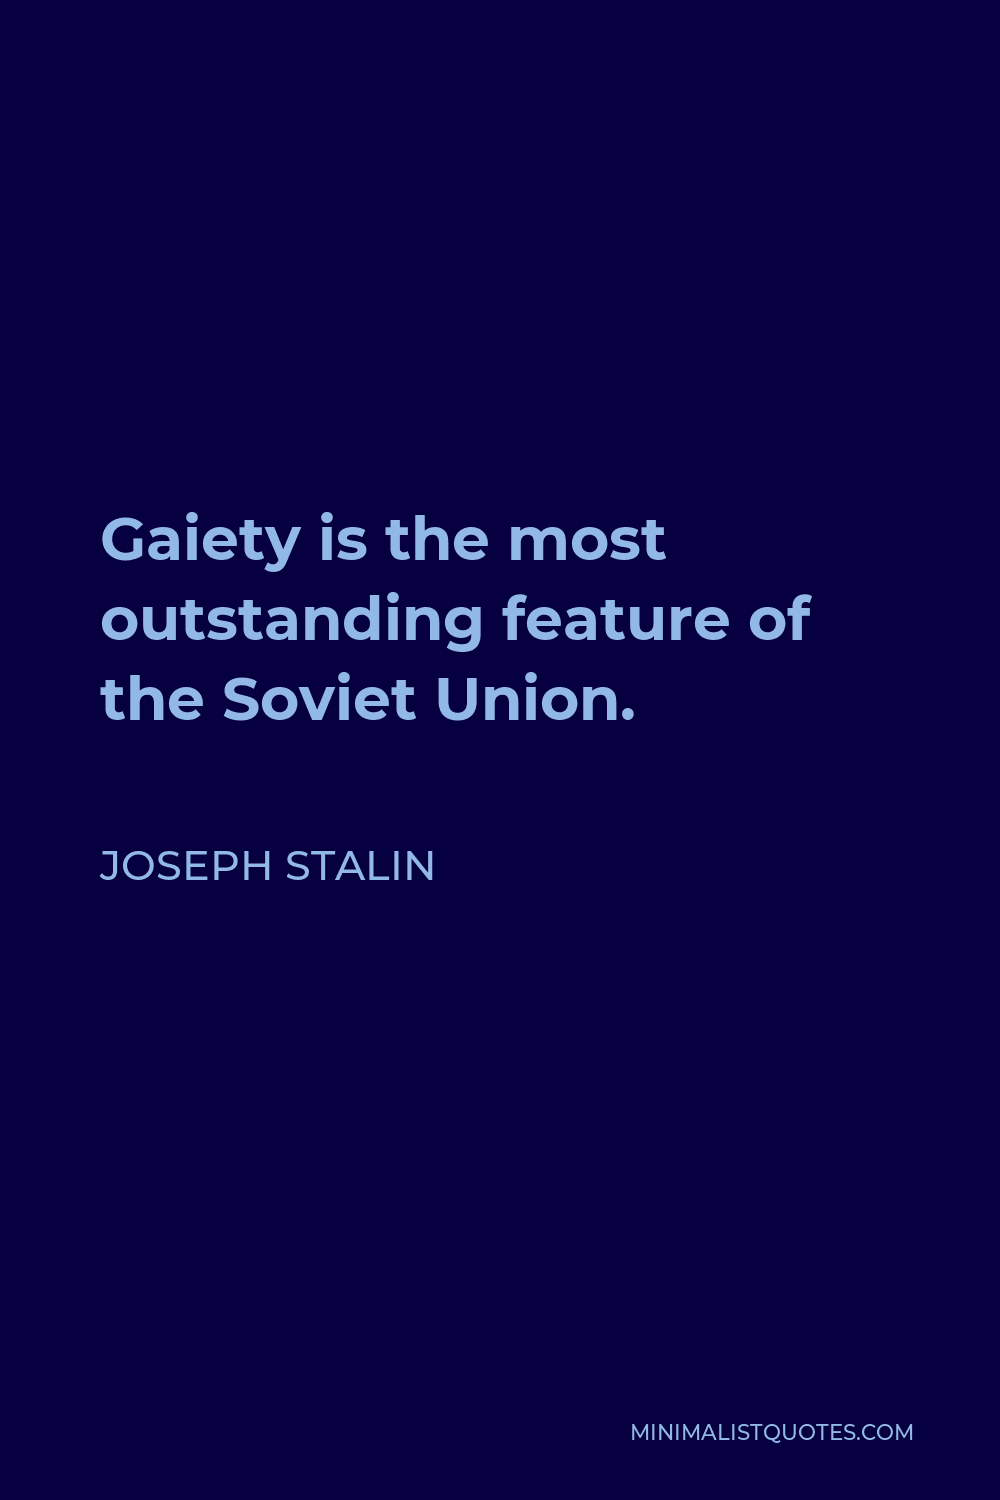 Joseph Stalin Quote - Gaiety is the most outstanding feature of the Soviet Union.